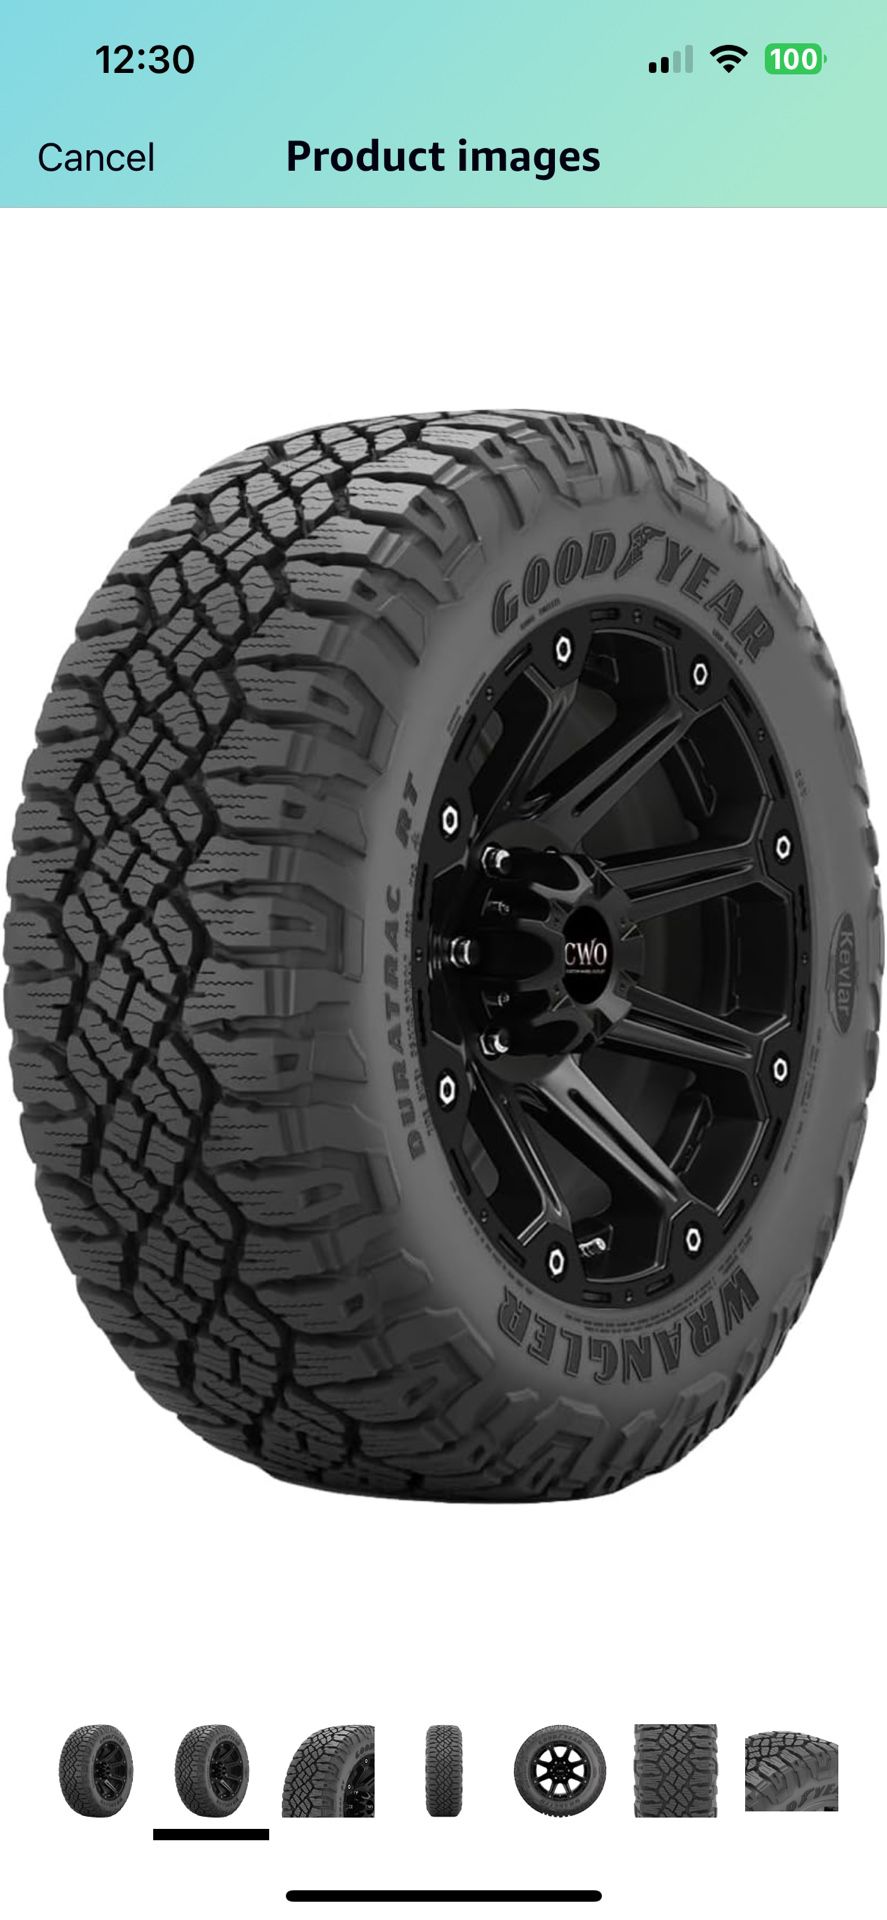 NEW 275/60R20 Goodyear Wrangler Duratrac RT 115T SL Black Wall Tire 1(contact info removed)1